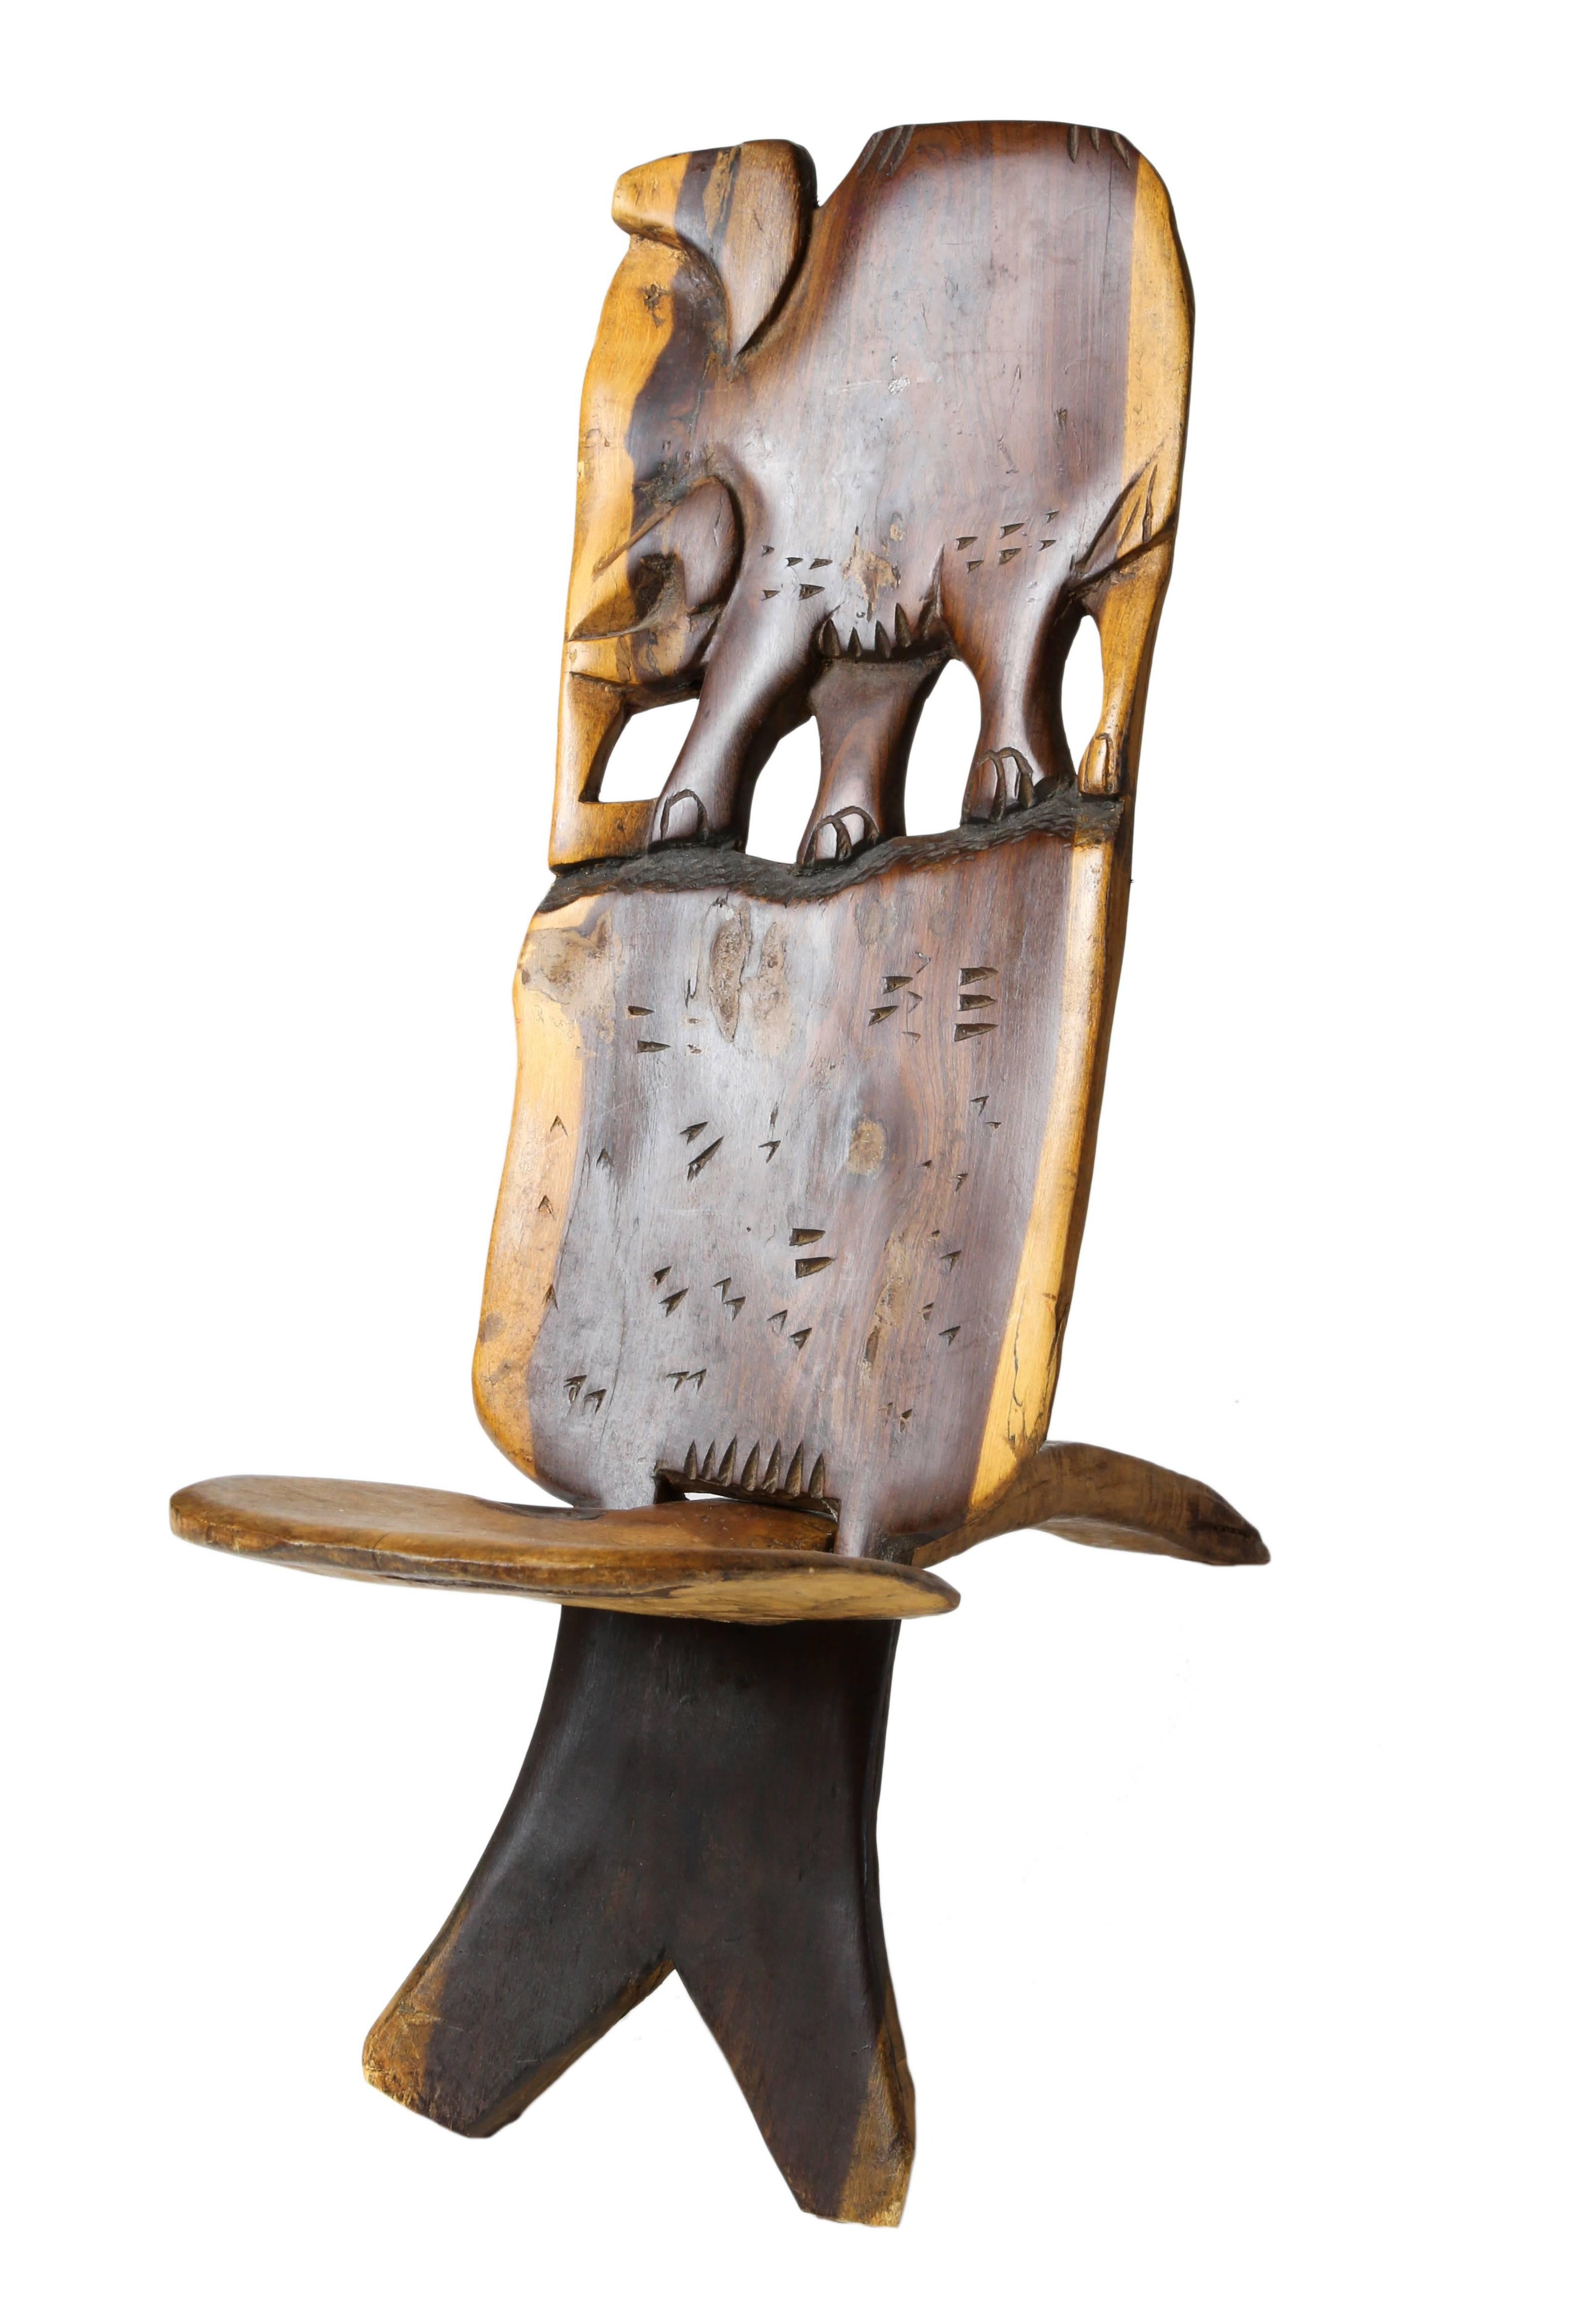 African two part small chair with carved elephant at the upper back, the seat fits into a pierced slot at center of the back board.